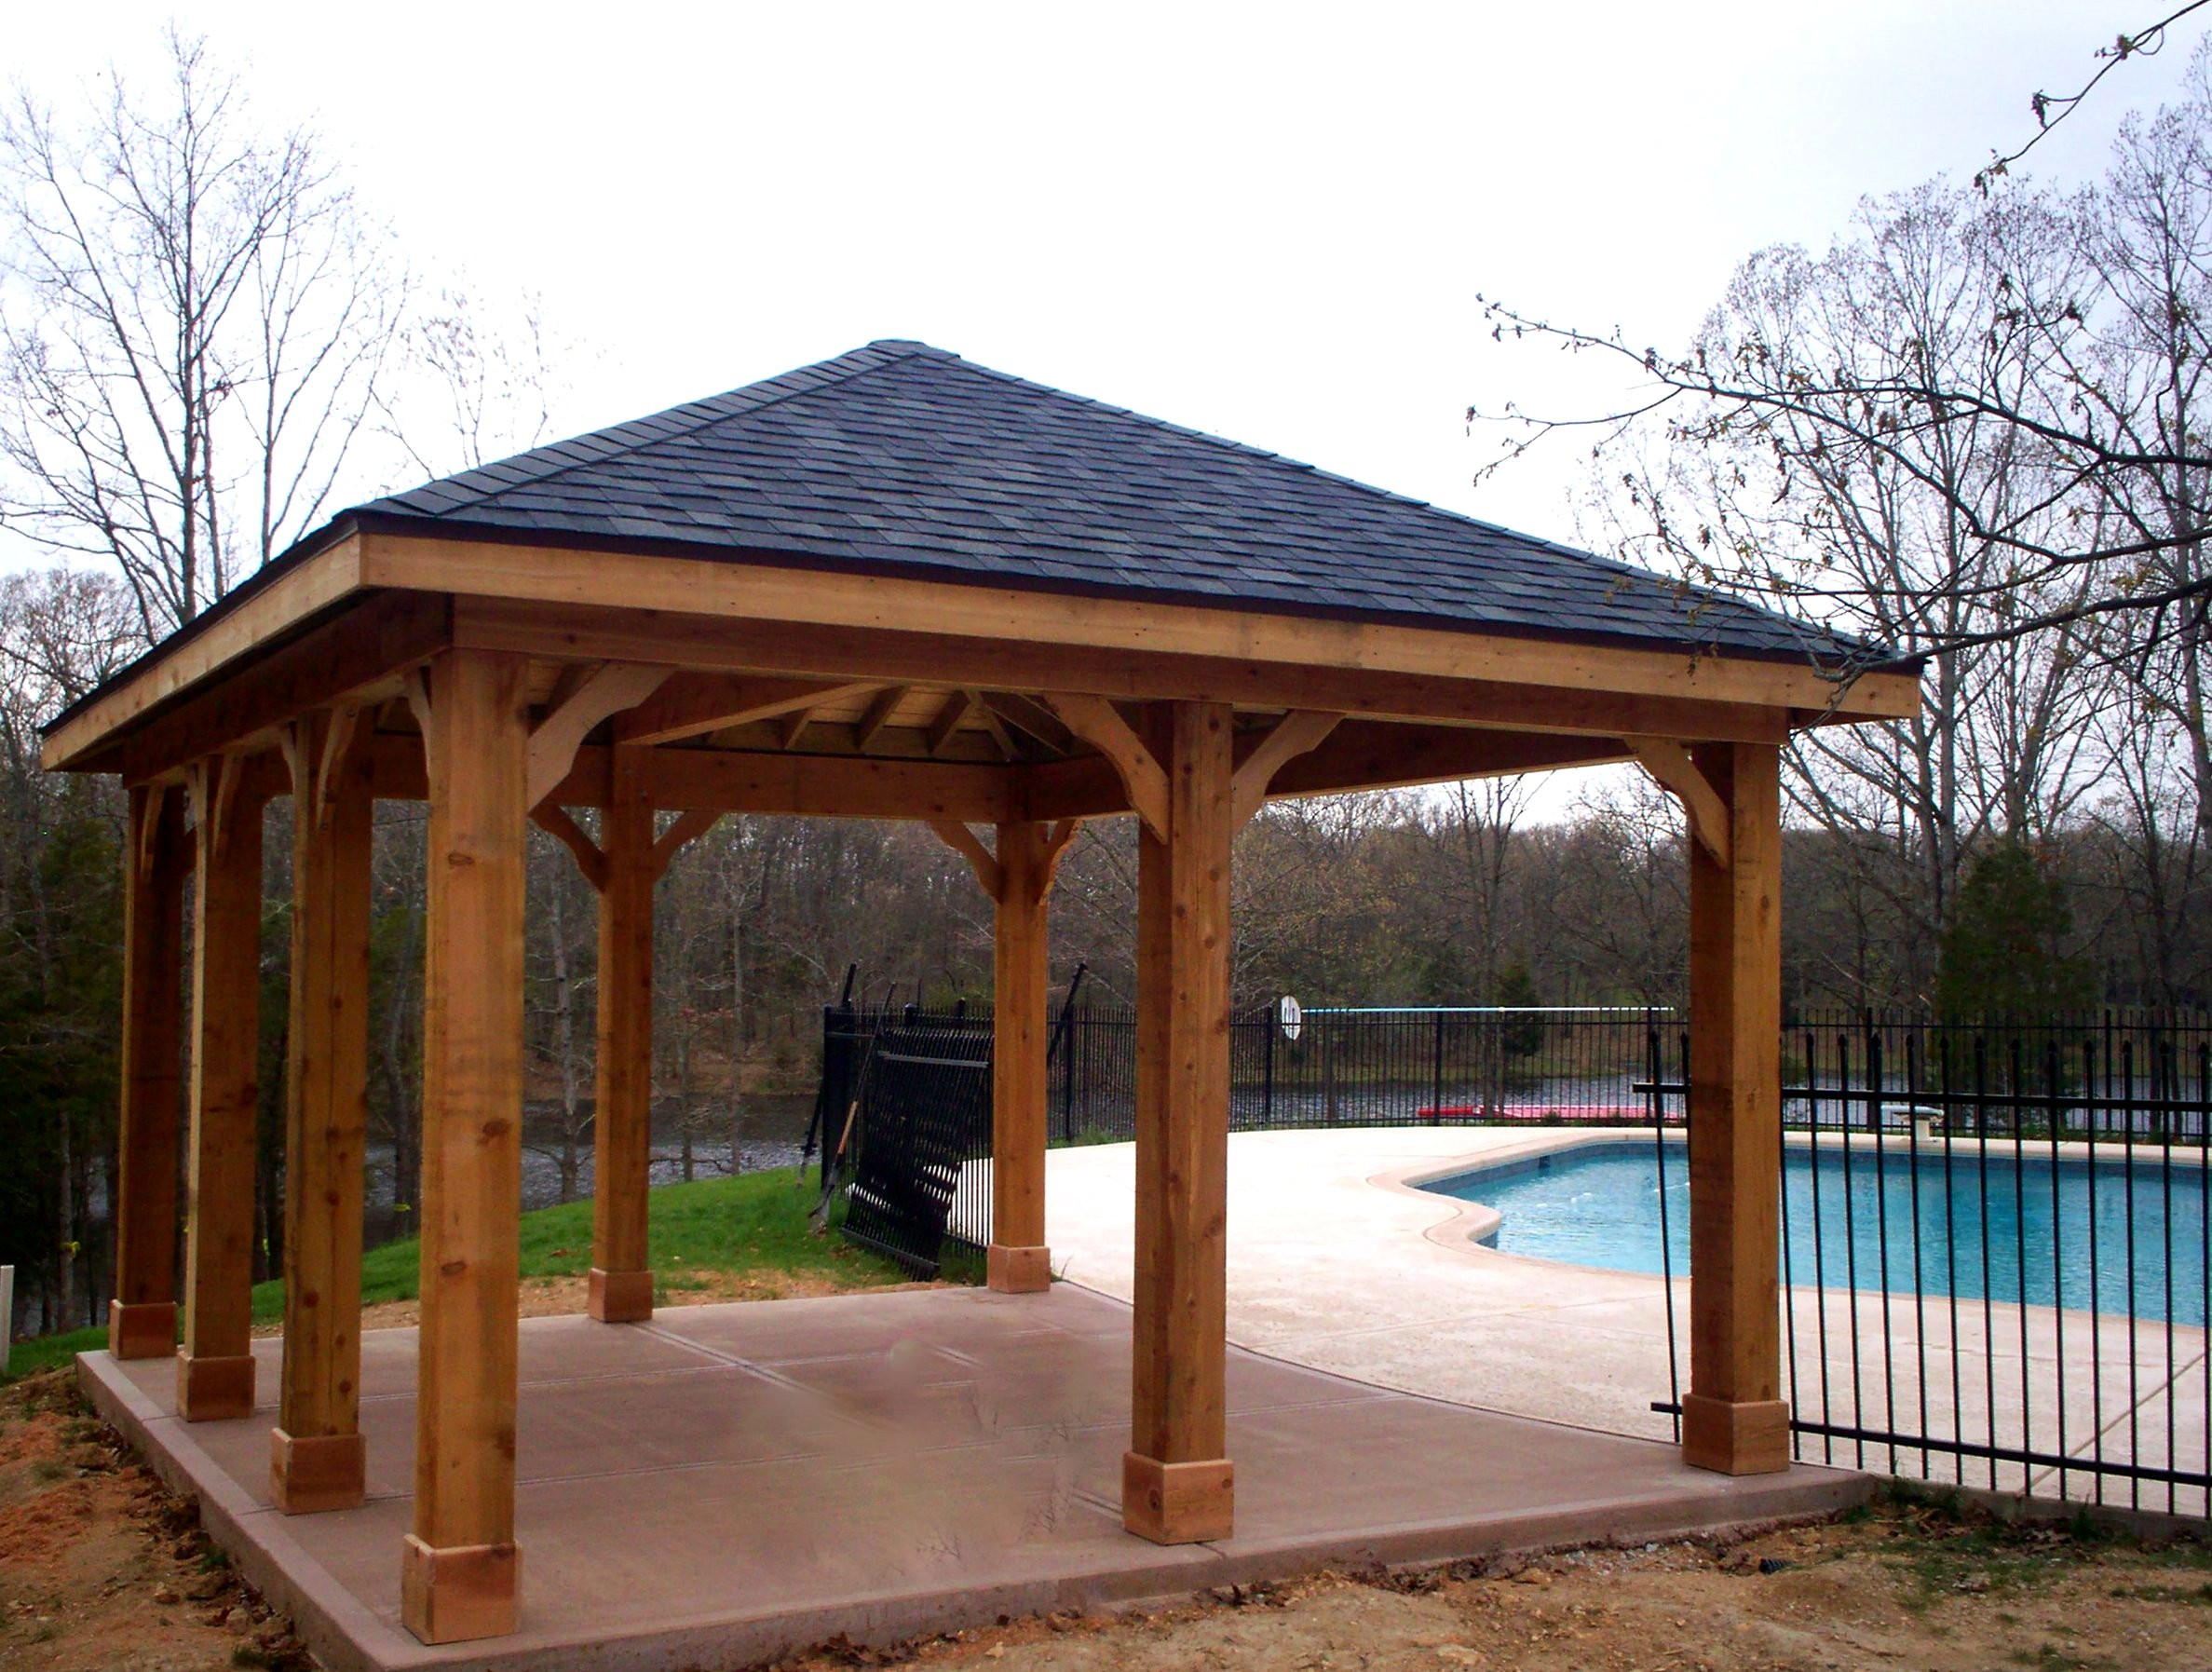 Backyard Patio Roof
 Patio Covers for Shade and Style